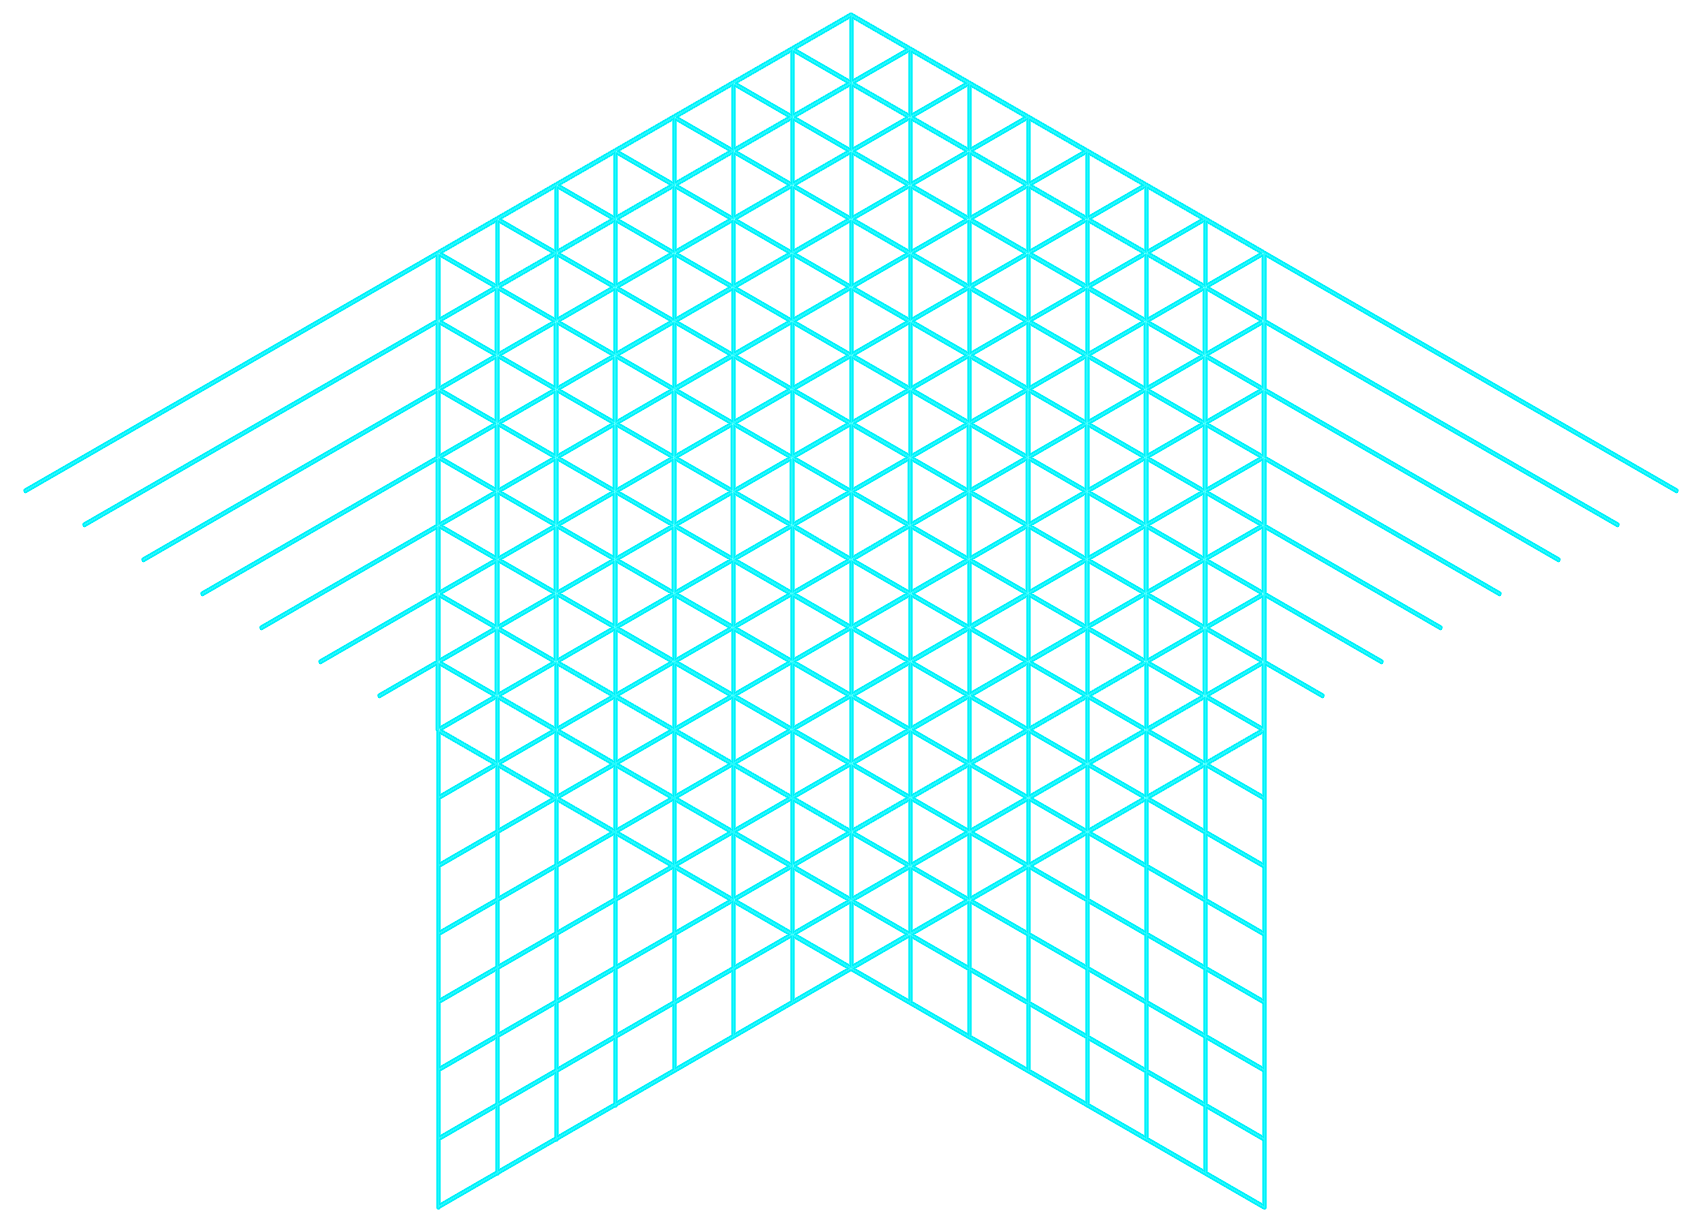 Guides made in Adobe Illustrator with concentric hexagons and diagonal lines